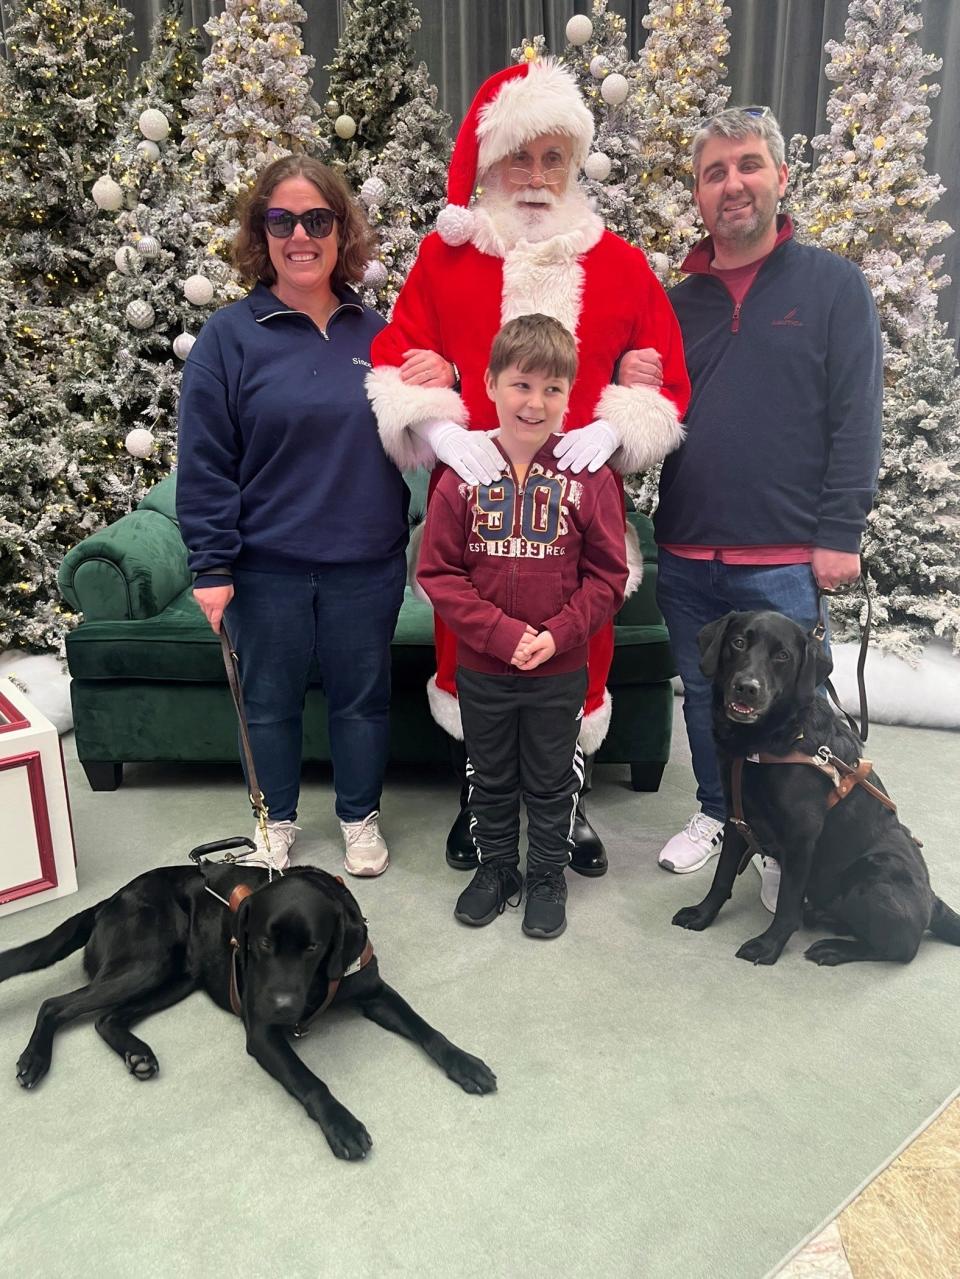 Kyle Street and his wife, Sioban Leahy, with their son, James, 8, with their guide dogs during a Christmas photo. Street and Leahy are blind and obtained their guide dogs from the Seeing Eye in Morristown.